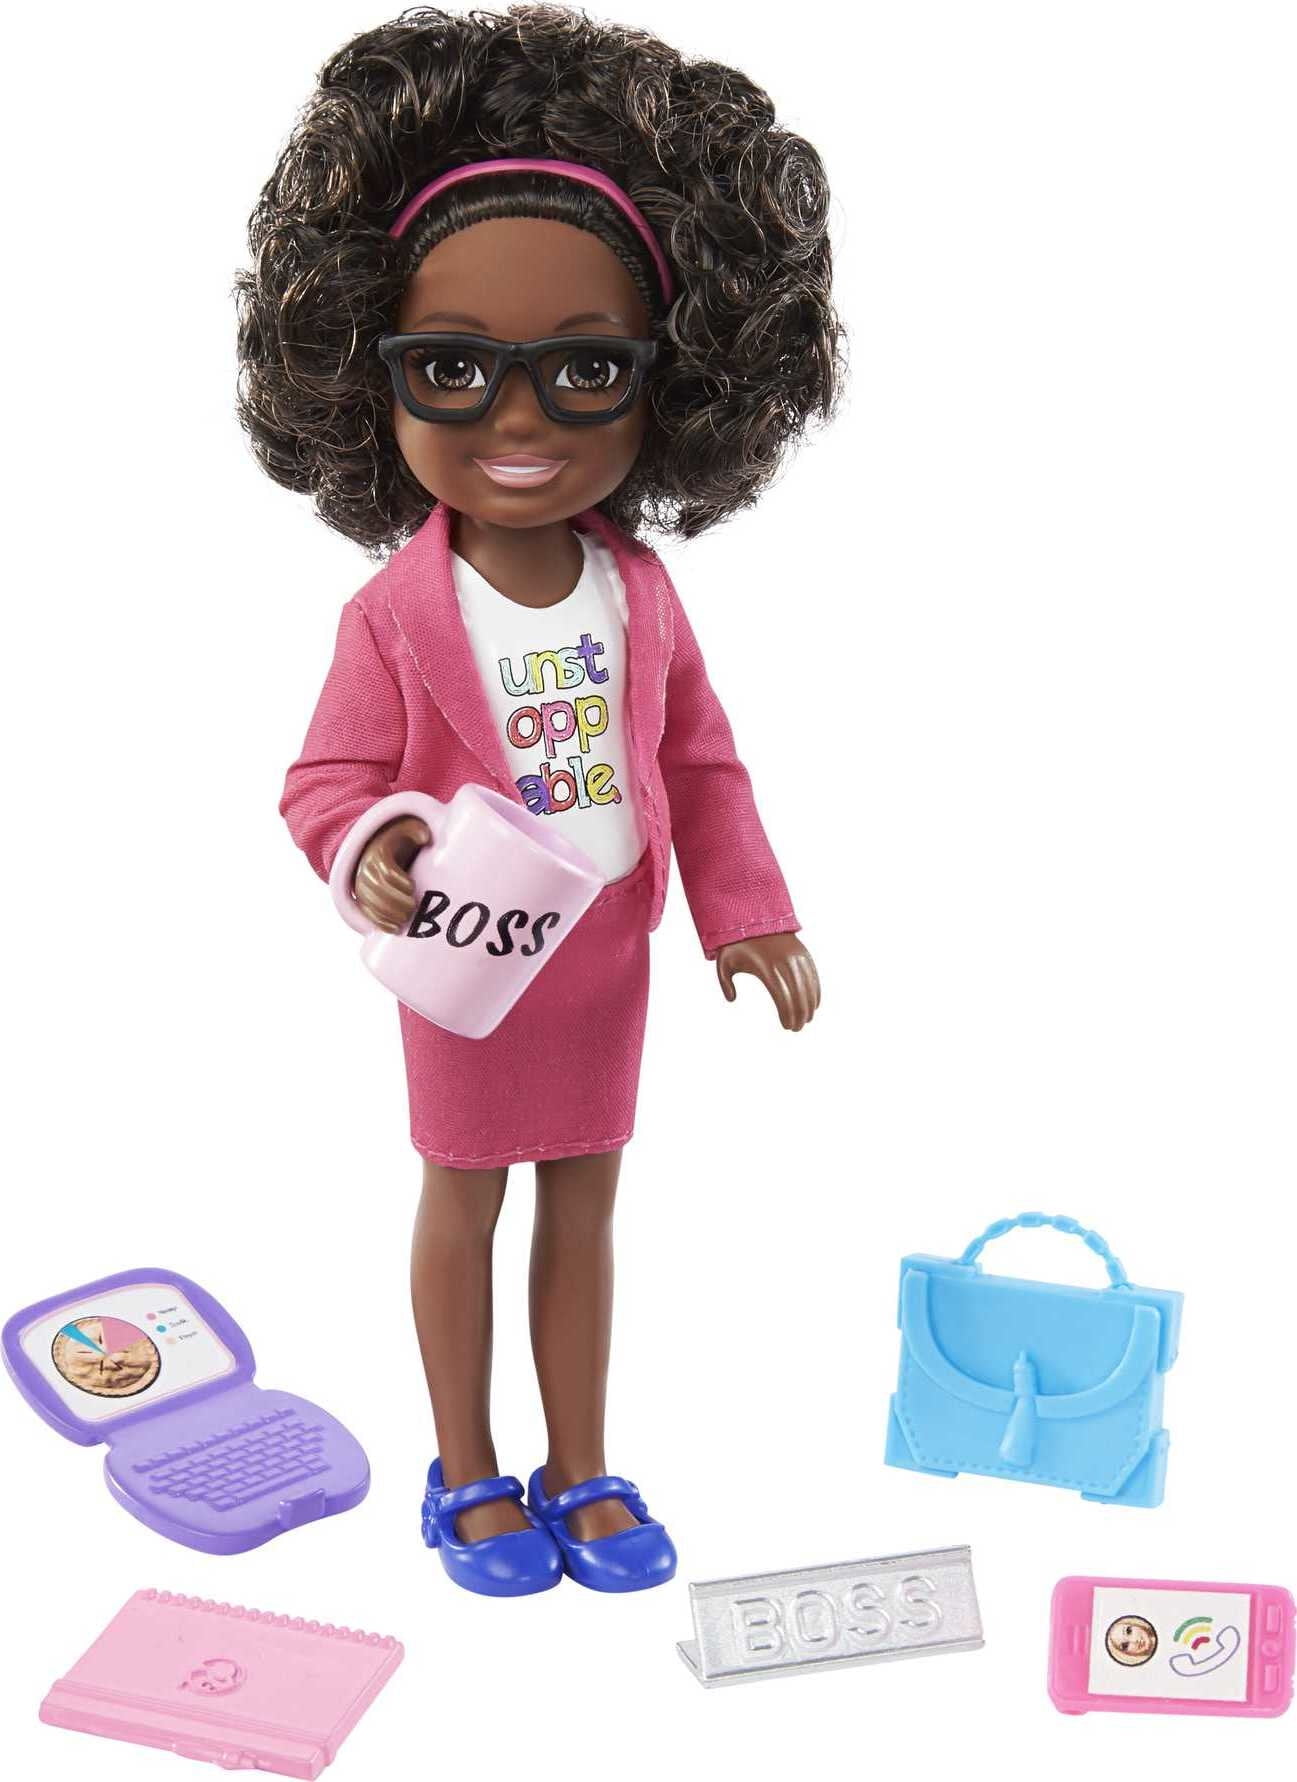 Barbie Chelsea Can Be Anything Boss Doll in Pink Suit with Curly Hair, Brown Eyes & 6 Accessories